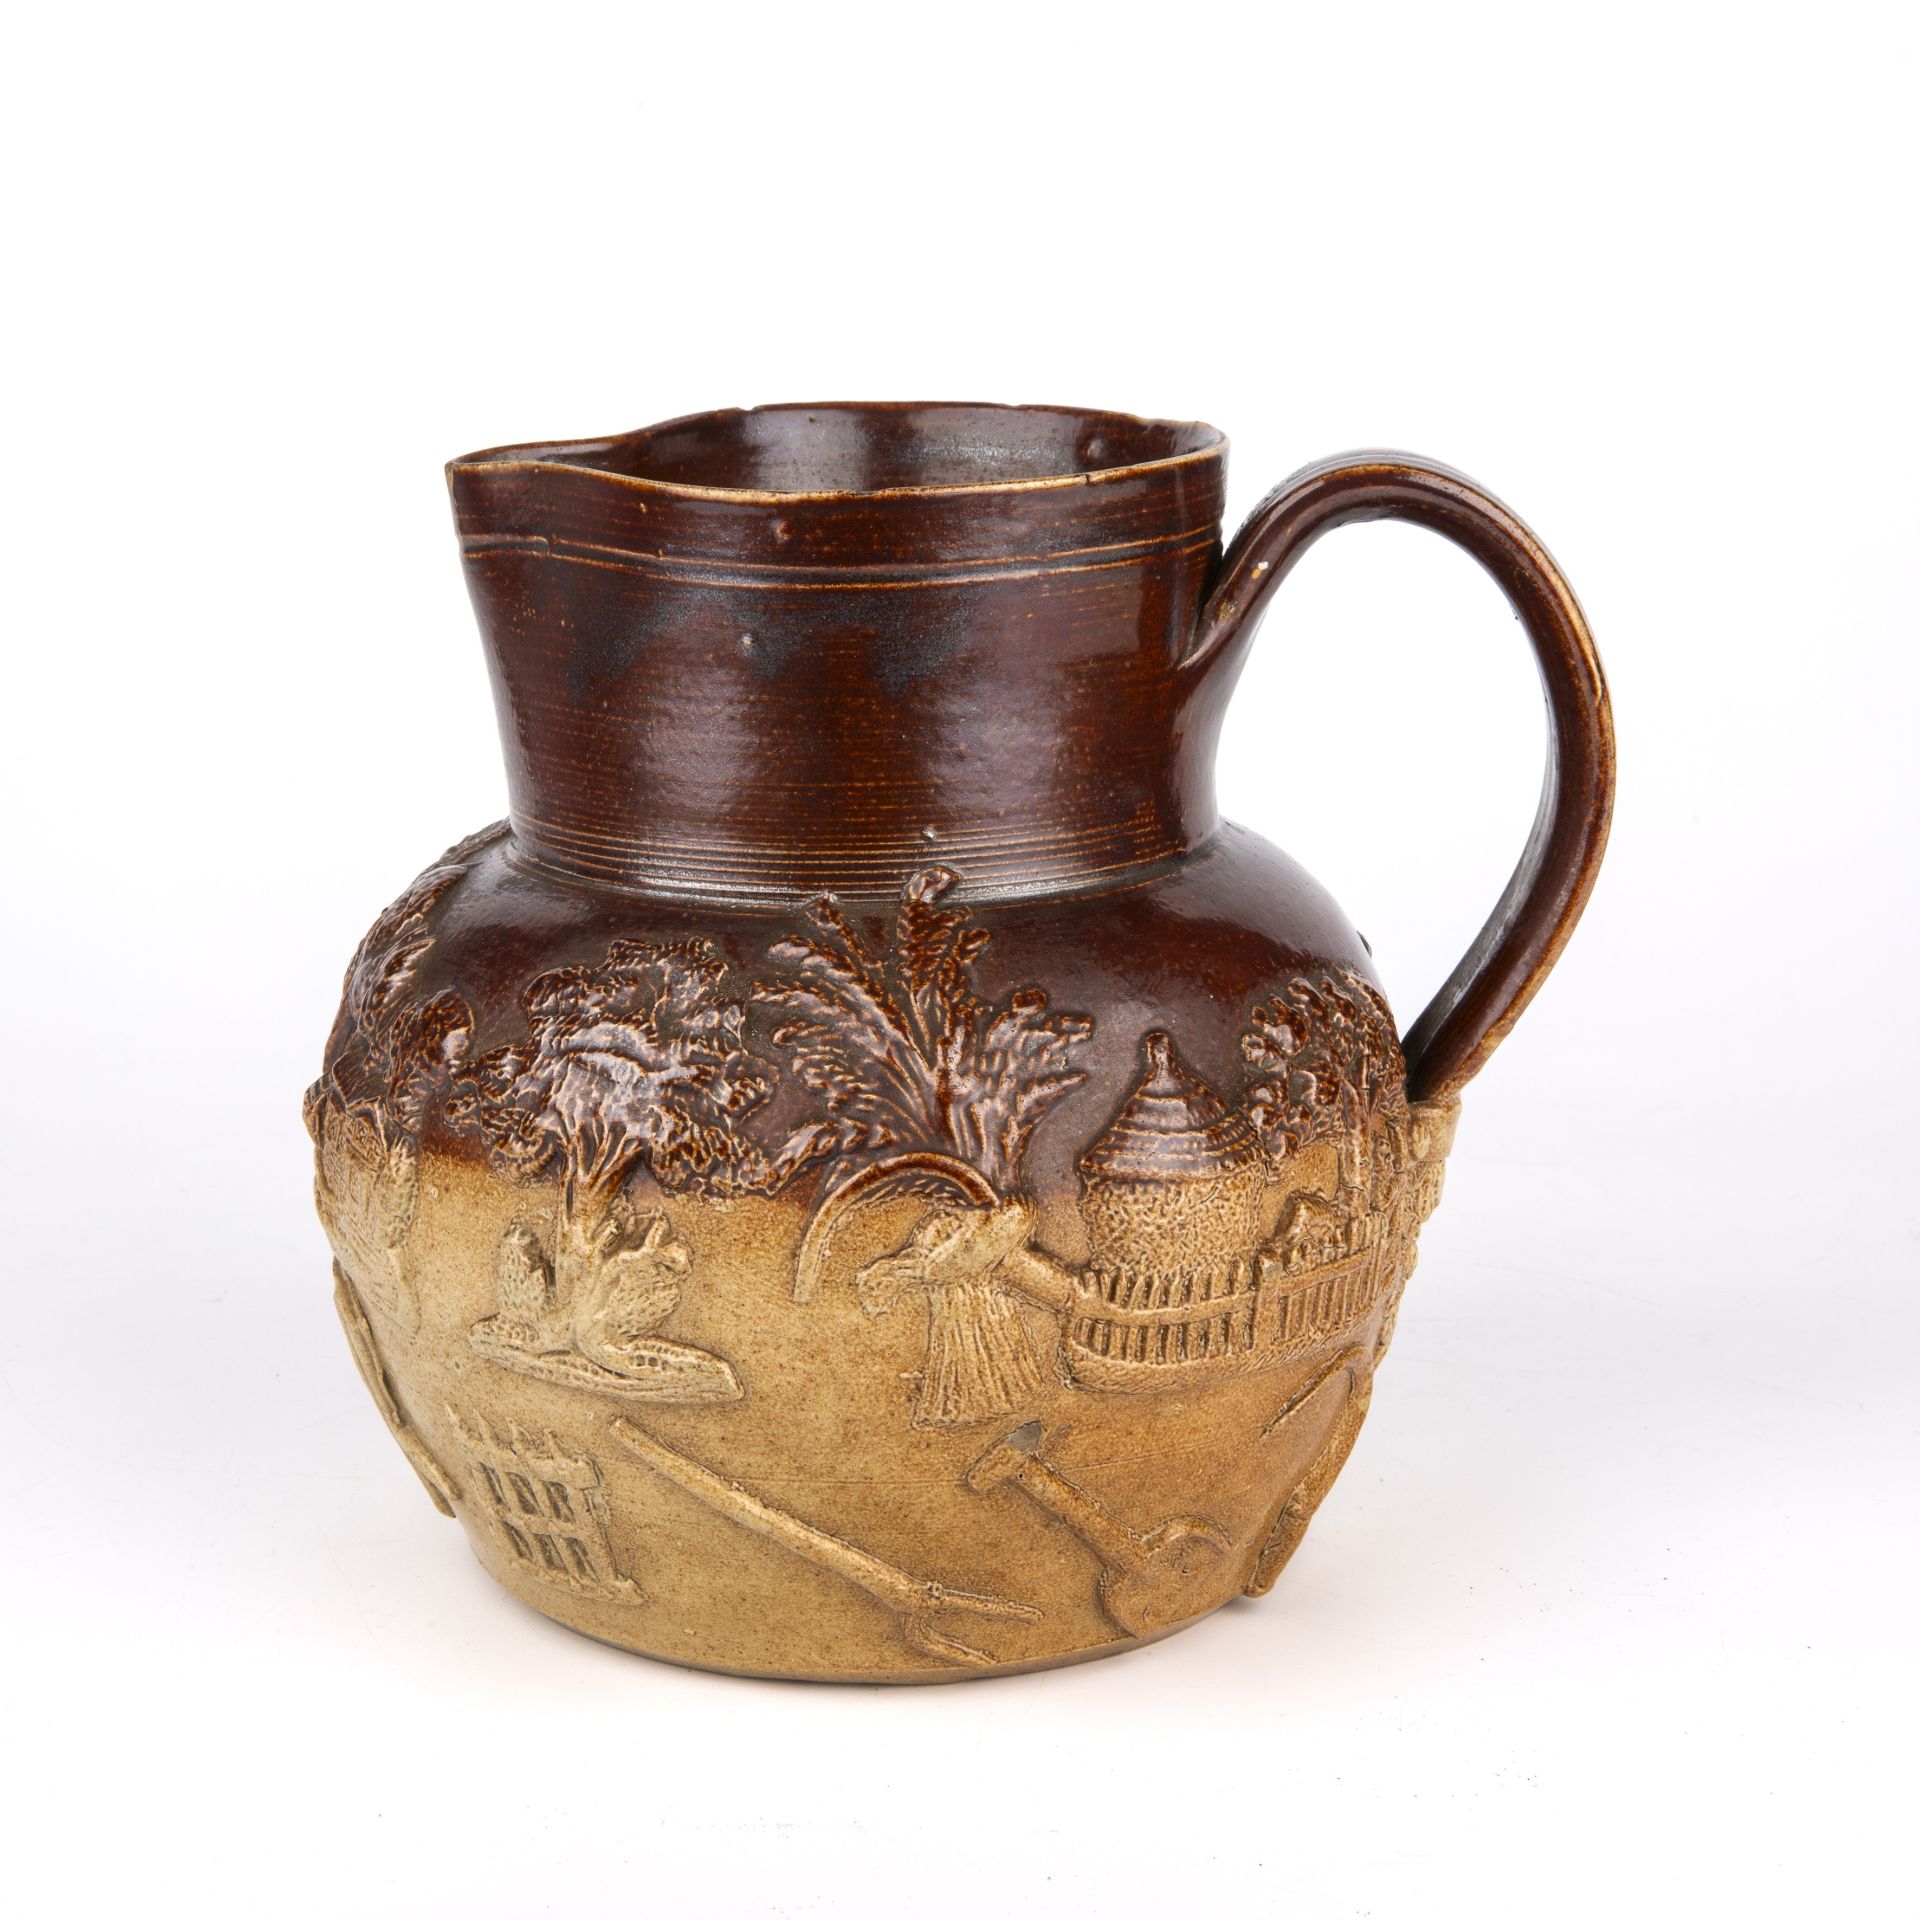 An early 19th century stoneware harvest jug in the manner of Joseph Kishere, Mortlake circa 1820,